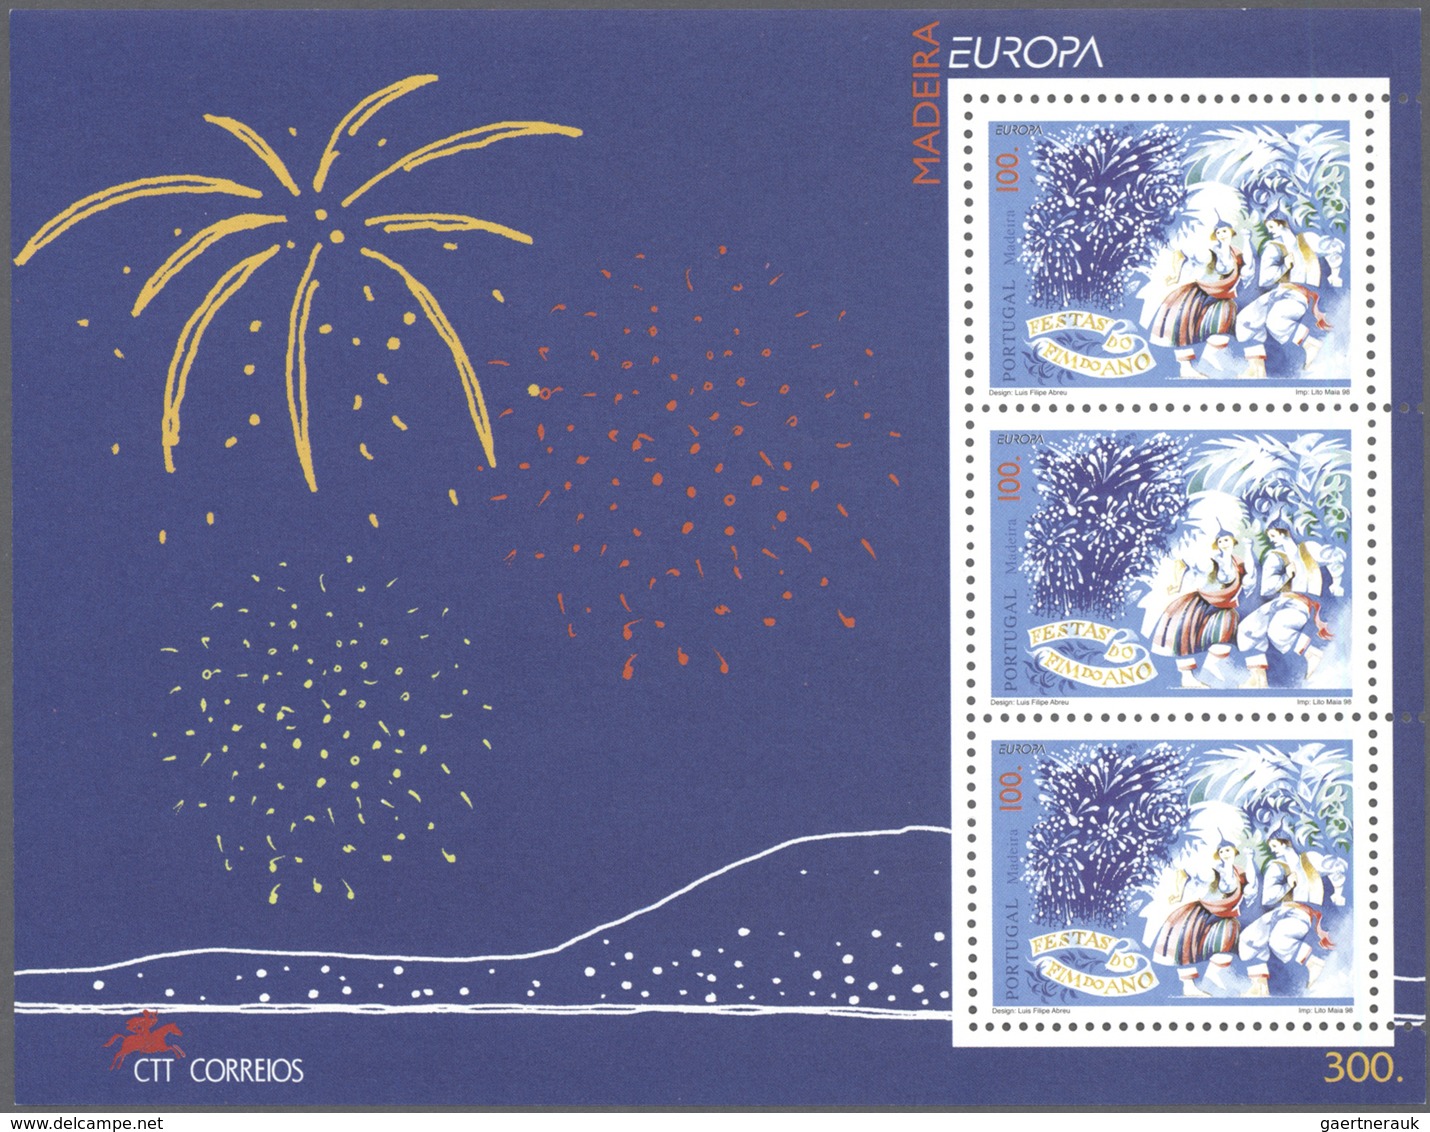 Europa-Union (CEPT): CEPT 1998 Complete Sets MHN Per 100, Including The Blocks And The Issues Of The - Autres - Europe